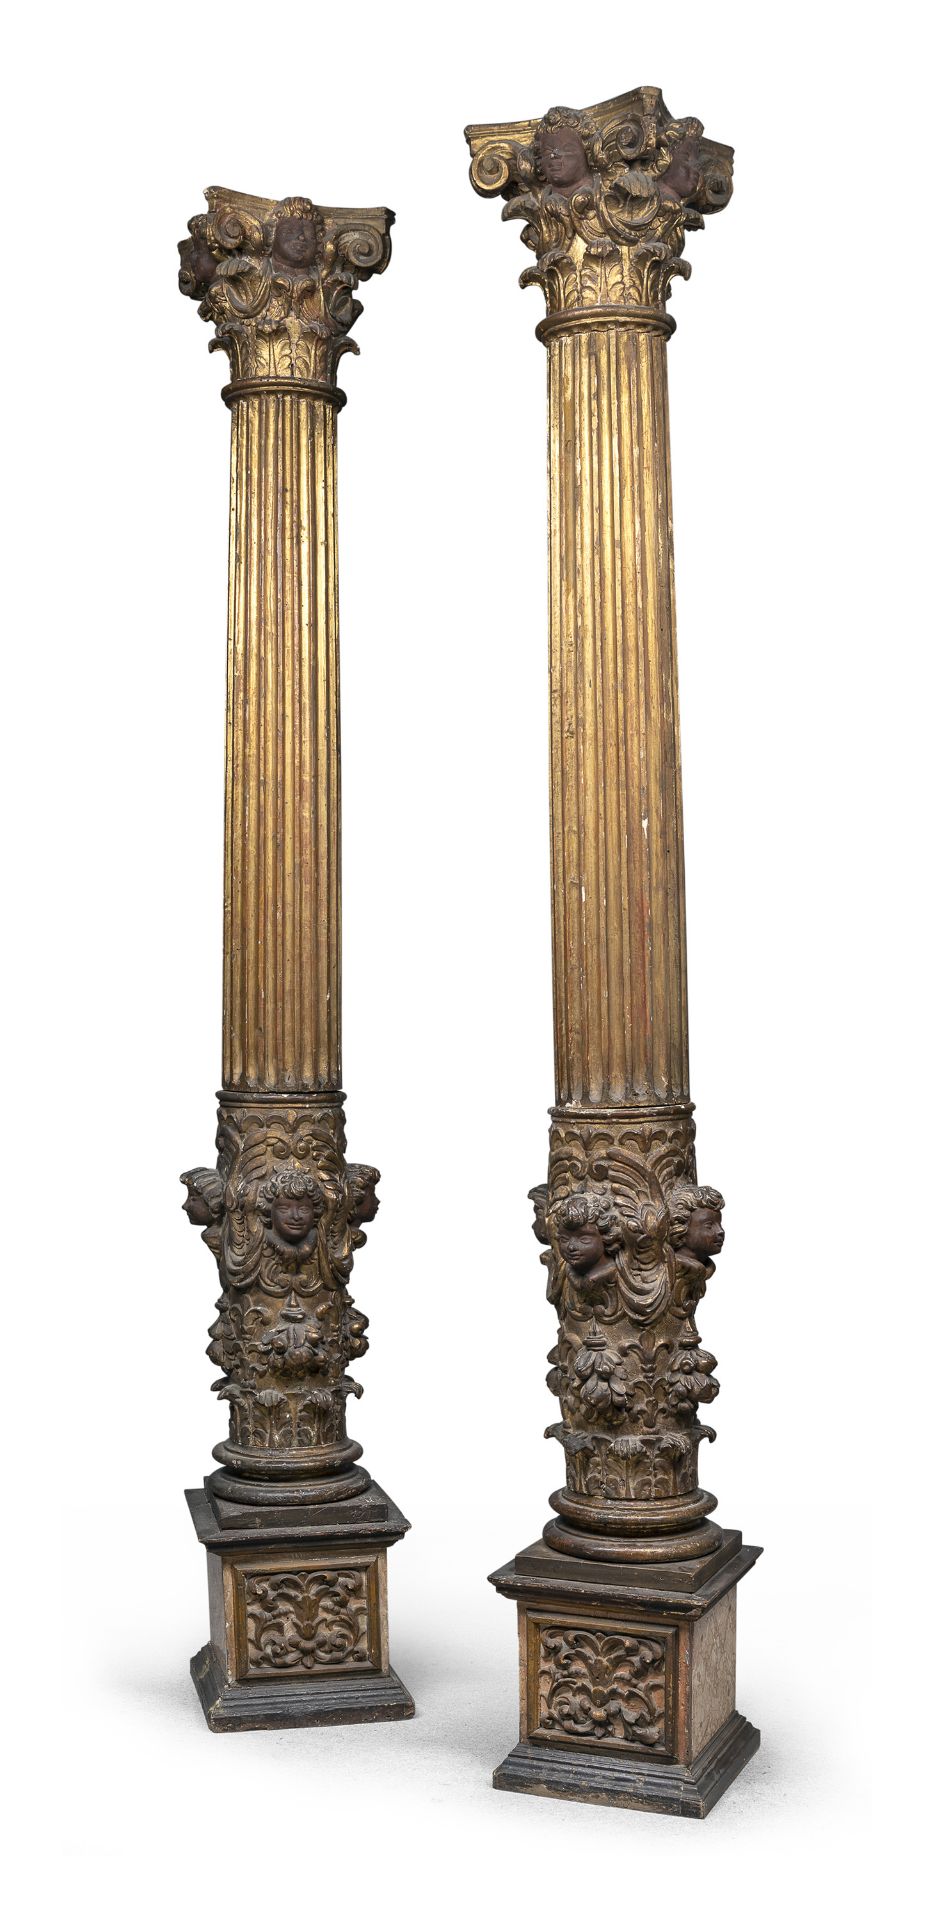 BEAUTIFUL PAIR OF COLUMNS IN GILT AND LACQUERED WOOD NORTHERN ITALY 18th CENTURY